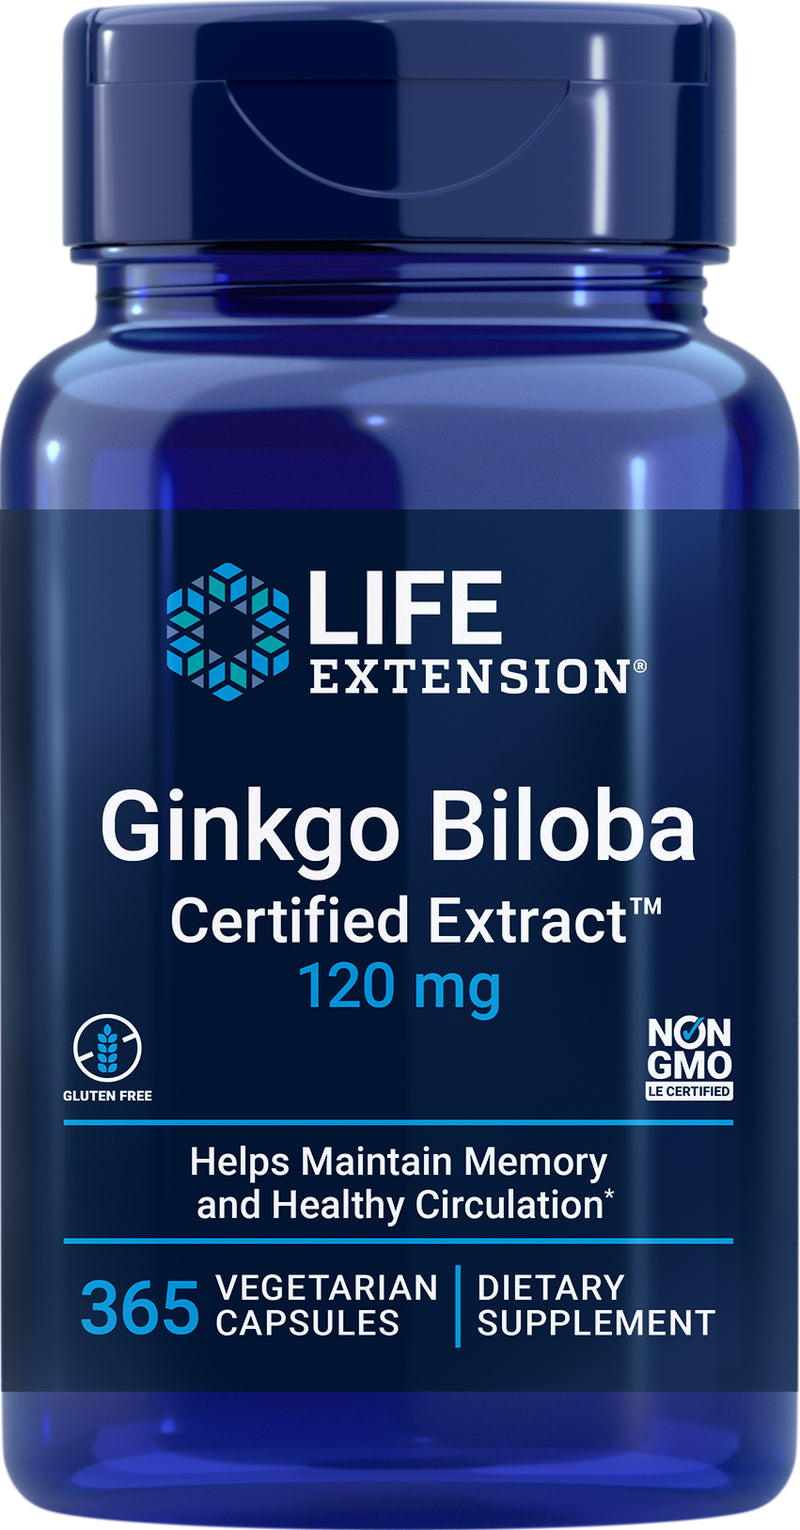 Ginkgo Biloba Certified Extract™ 120 mg, 365 veg caps by Life Extension